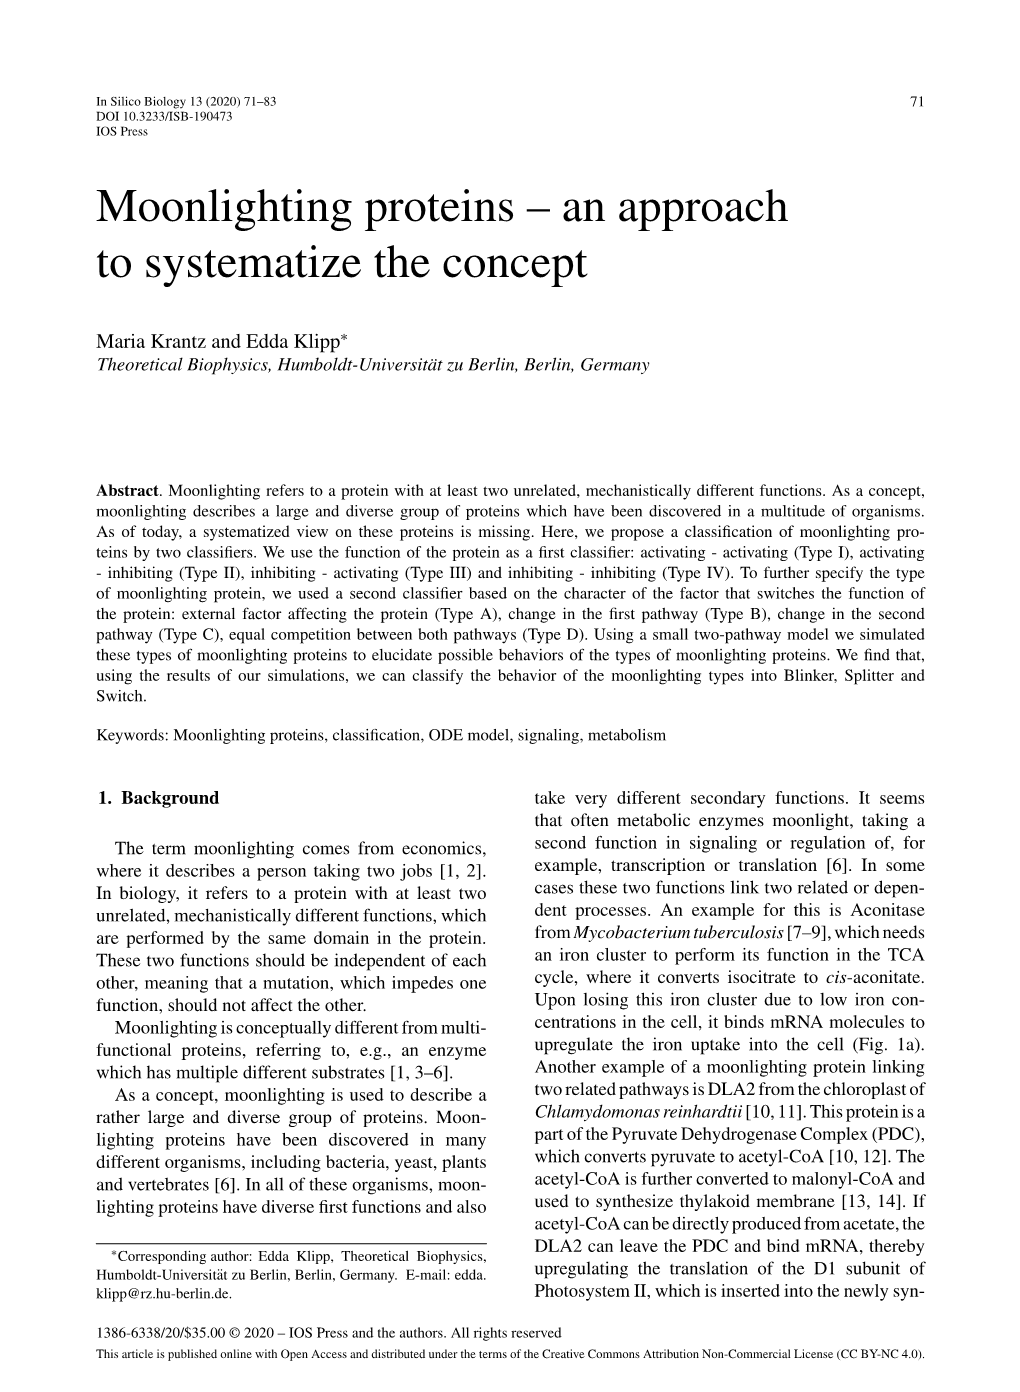 Moonlighting Proteins – an Approach to Systematize the Concept